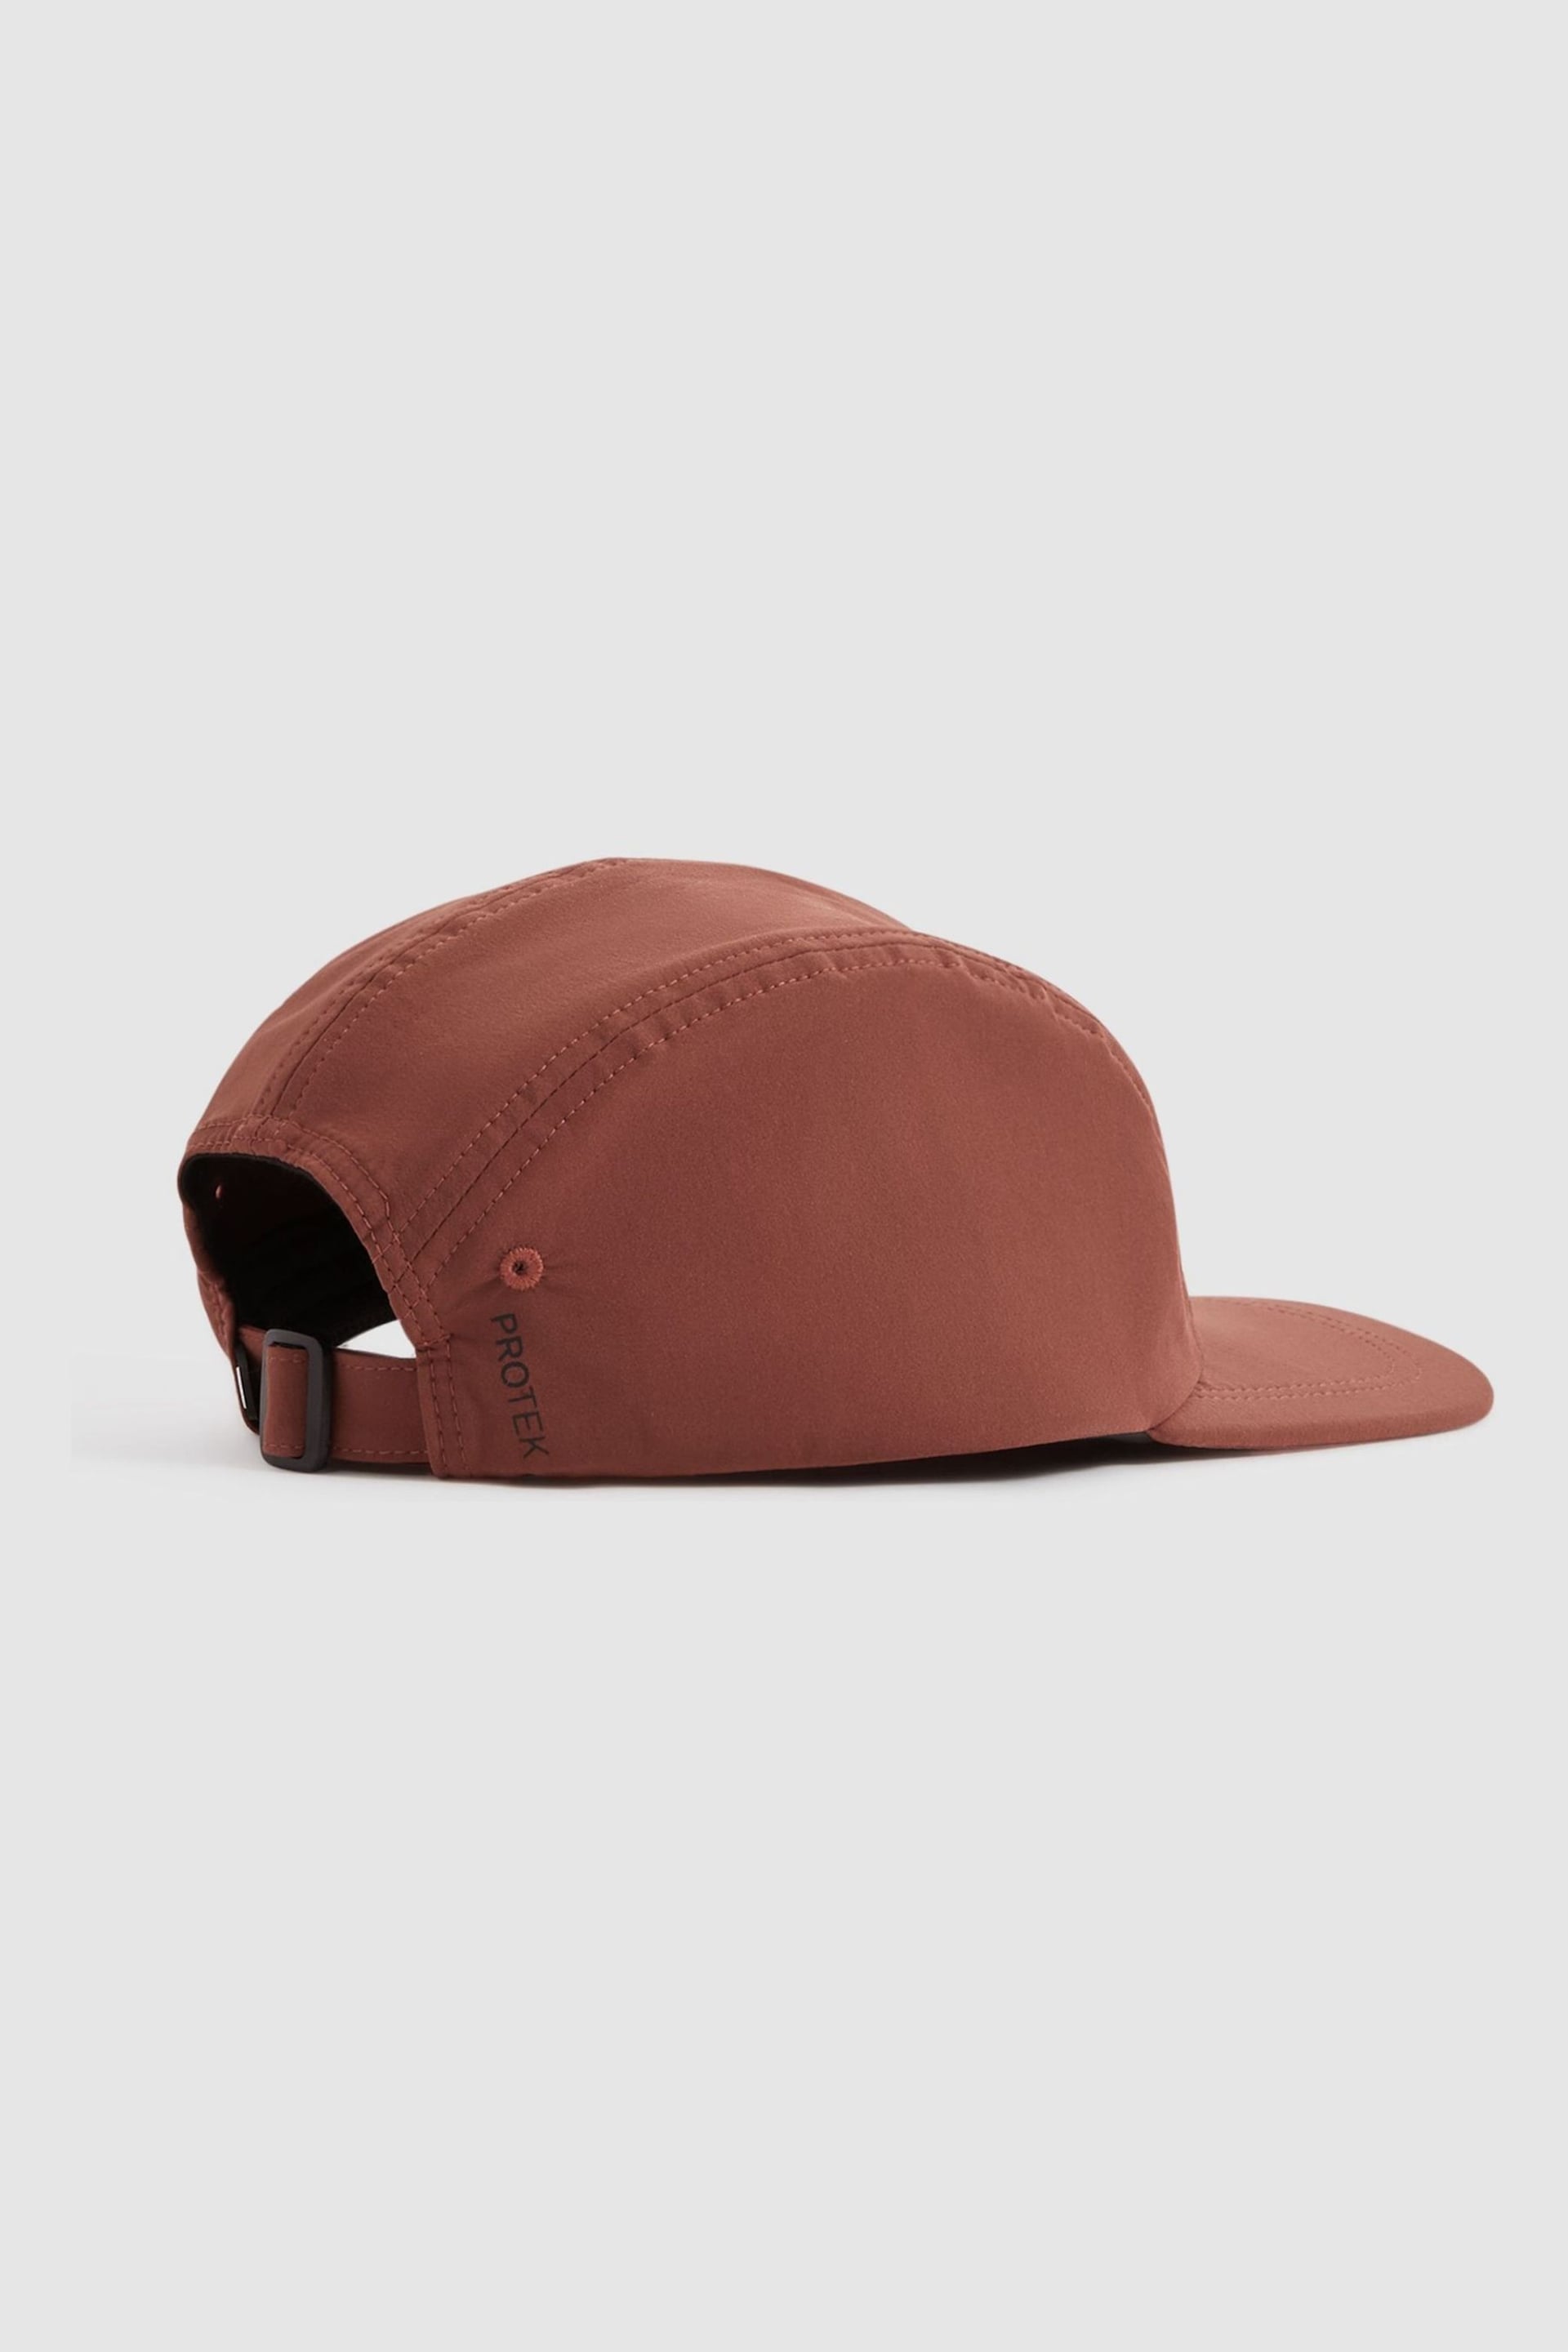 Reiss Rust Remy Castore Water Repellent Baseball Cap - Image 3 of 4